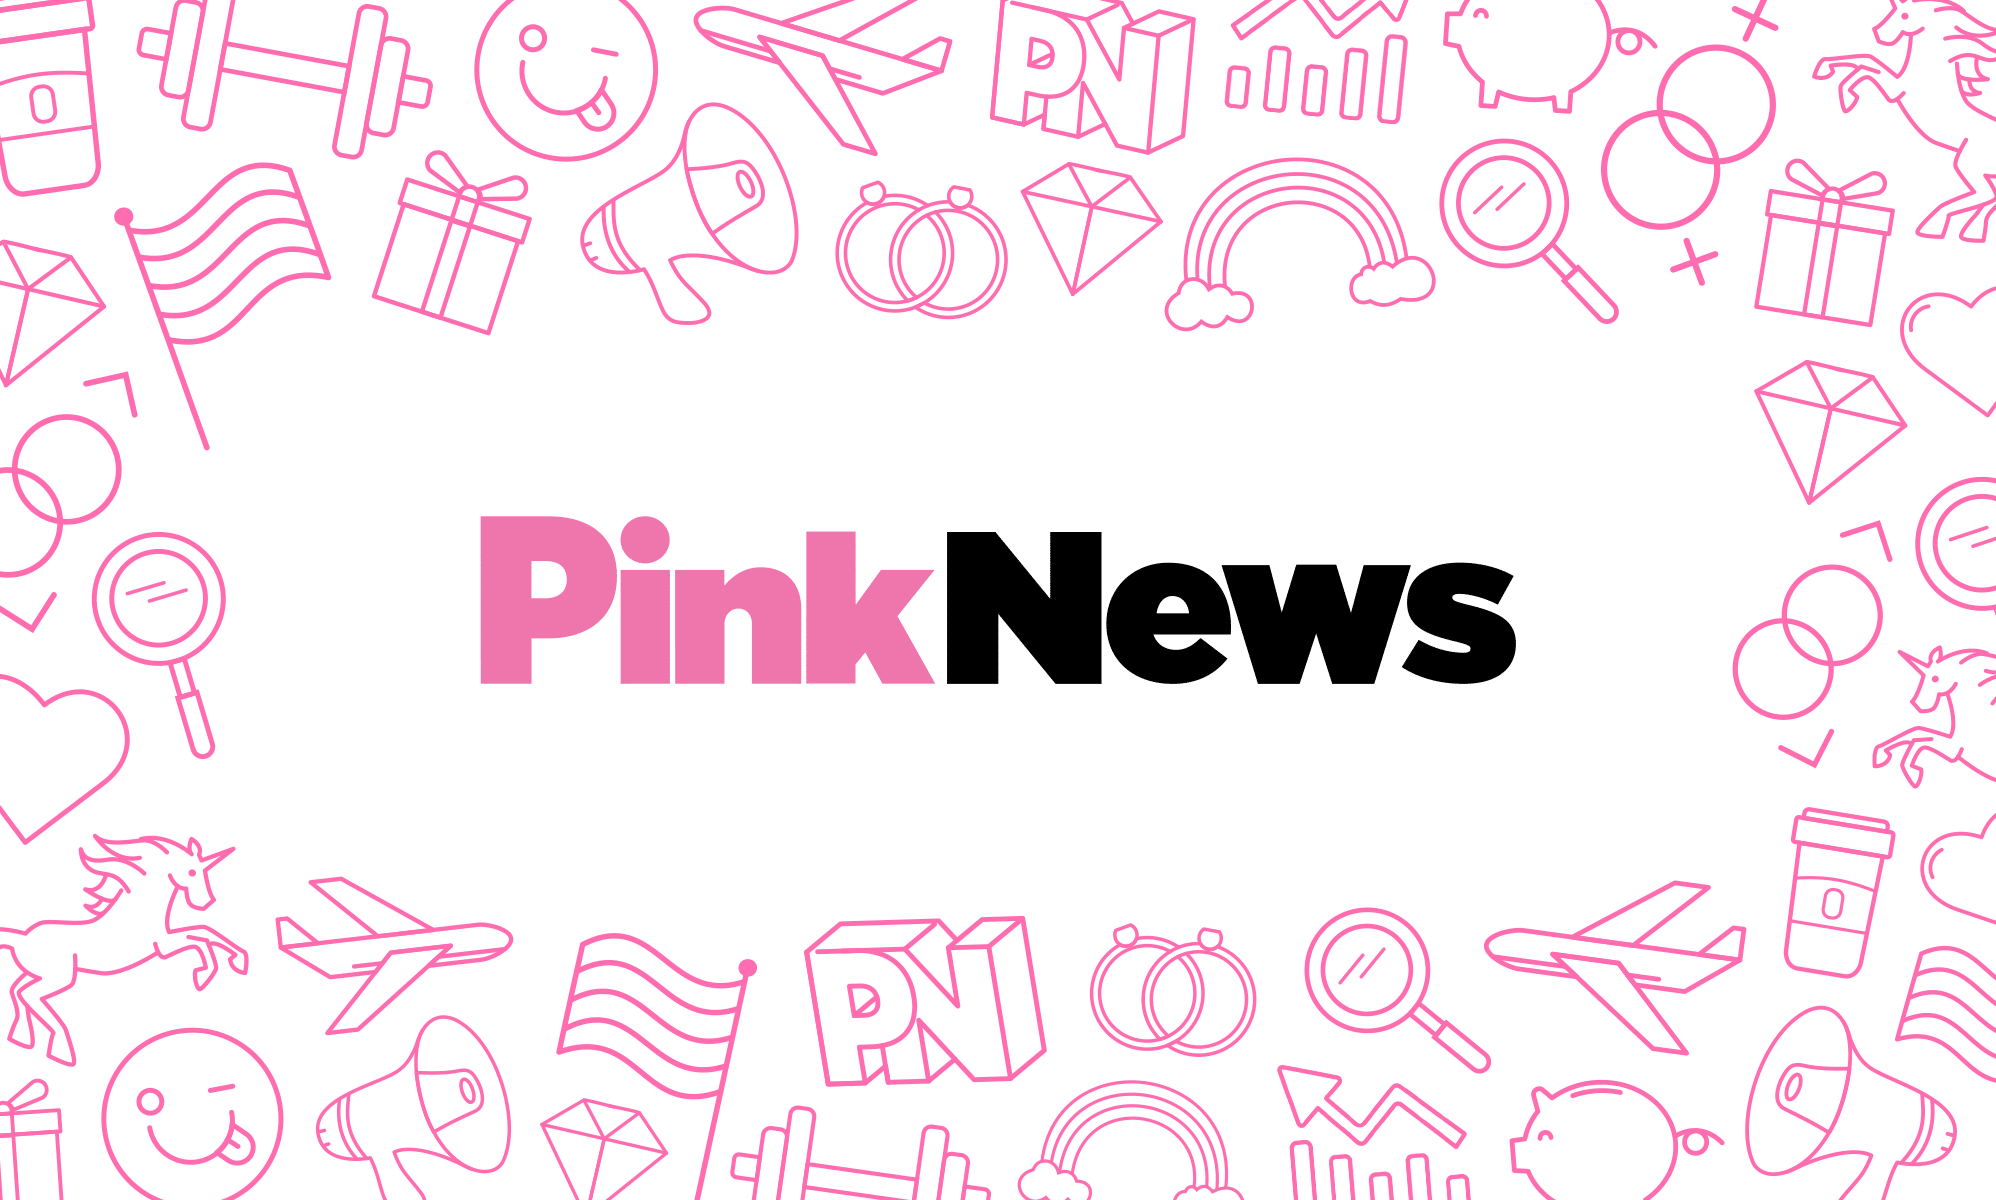 Highlights from the PinkNews Summer Parliamentary Reception with Jeremy Corbyn, Will Young and Lorraine Kelly